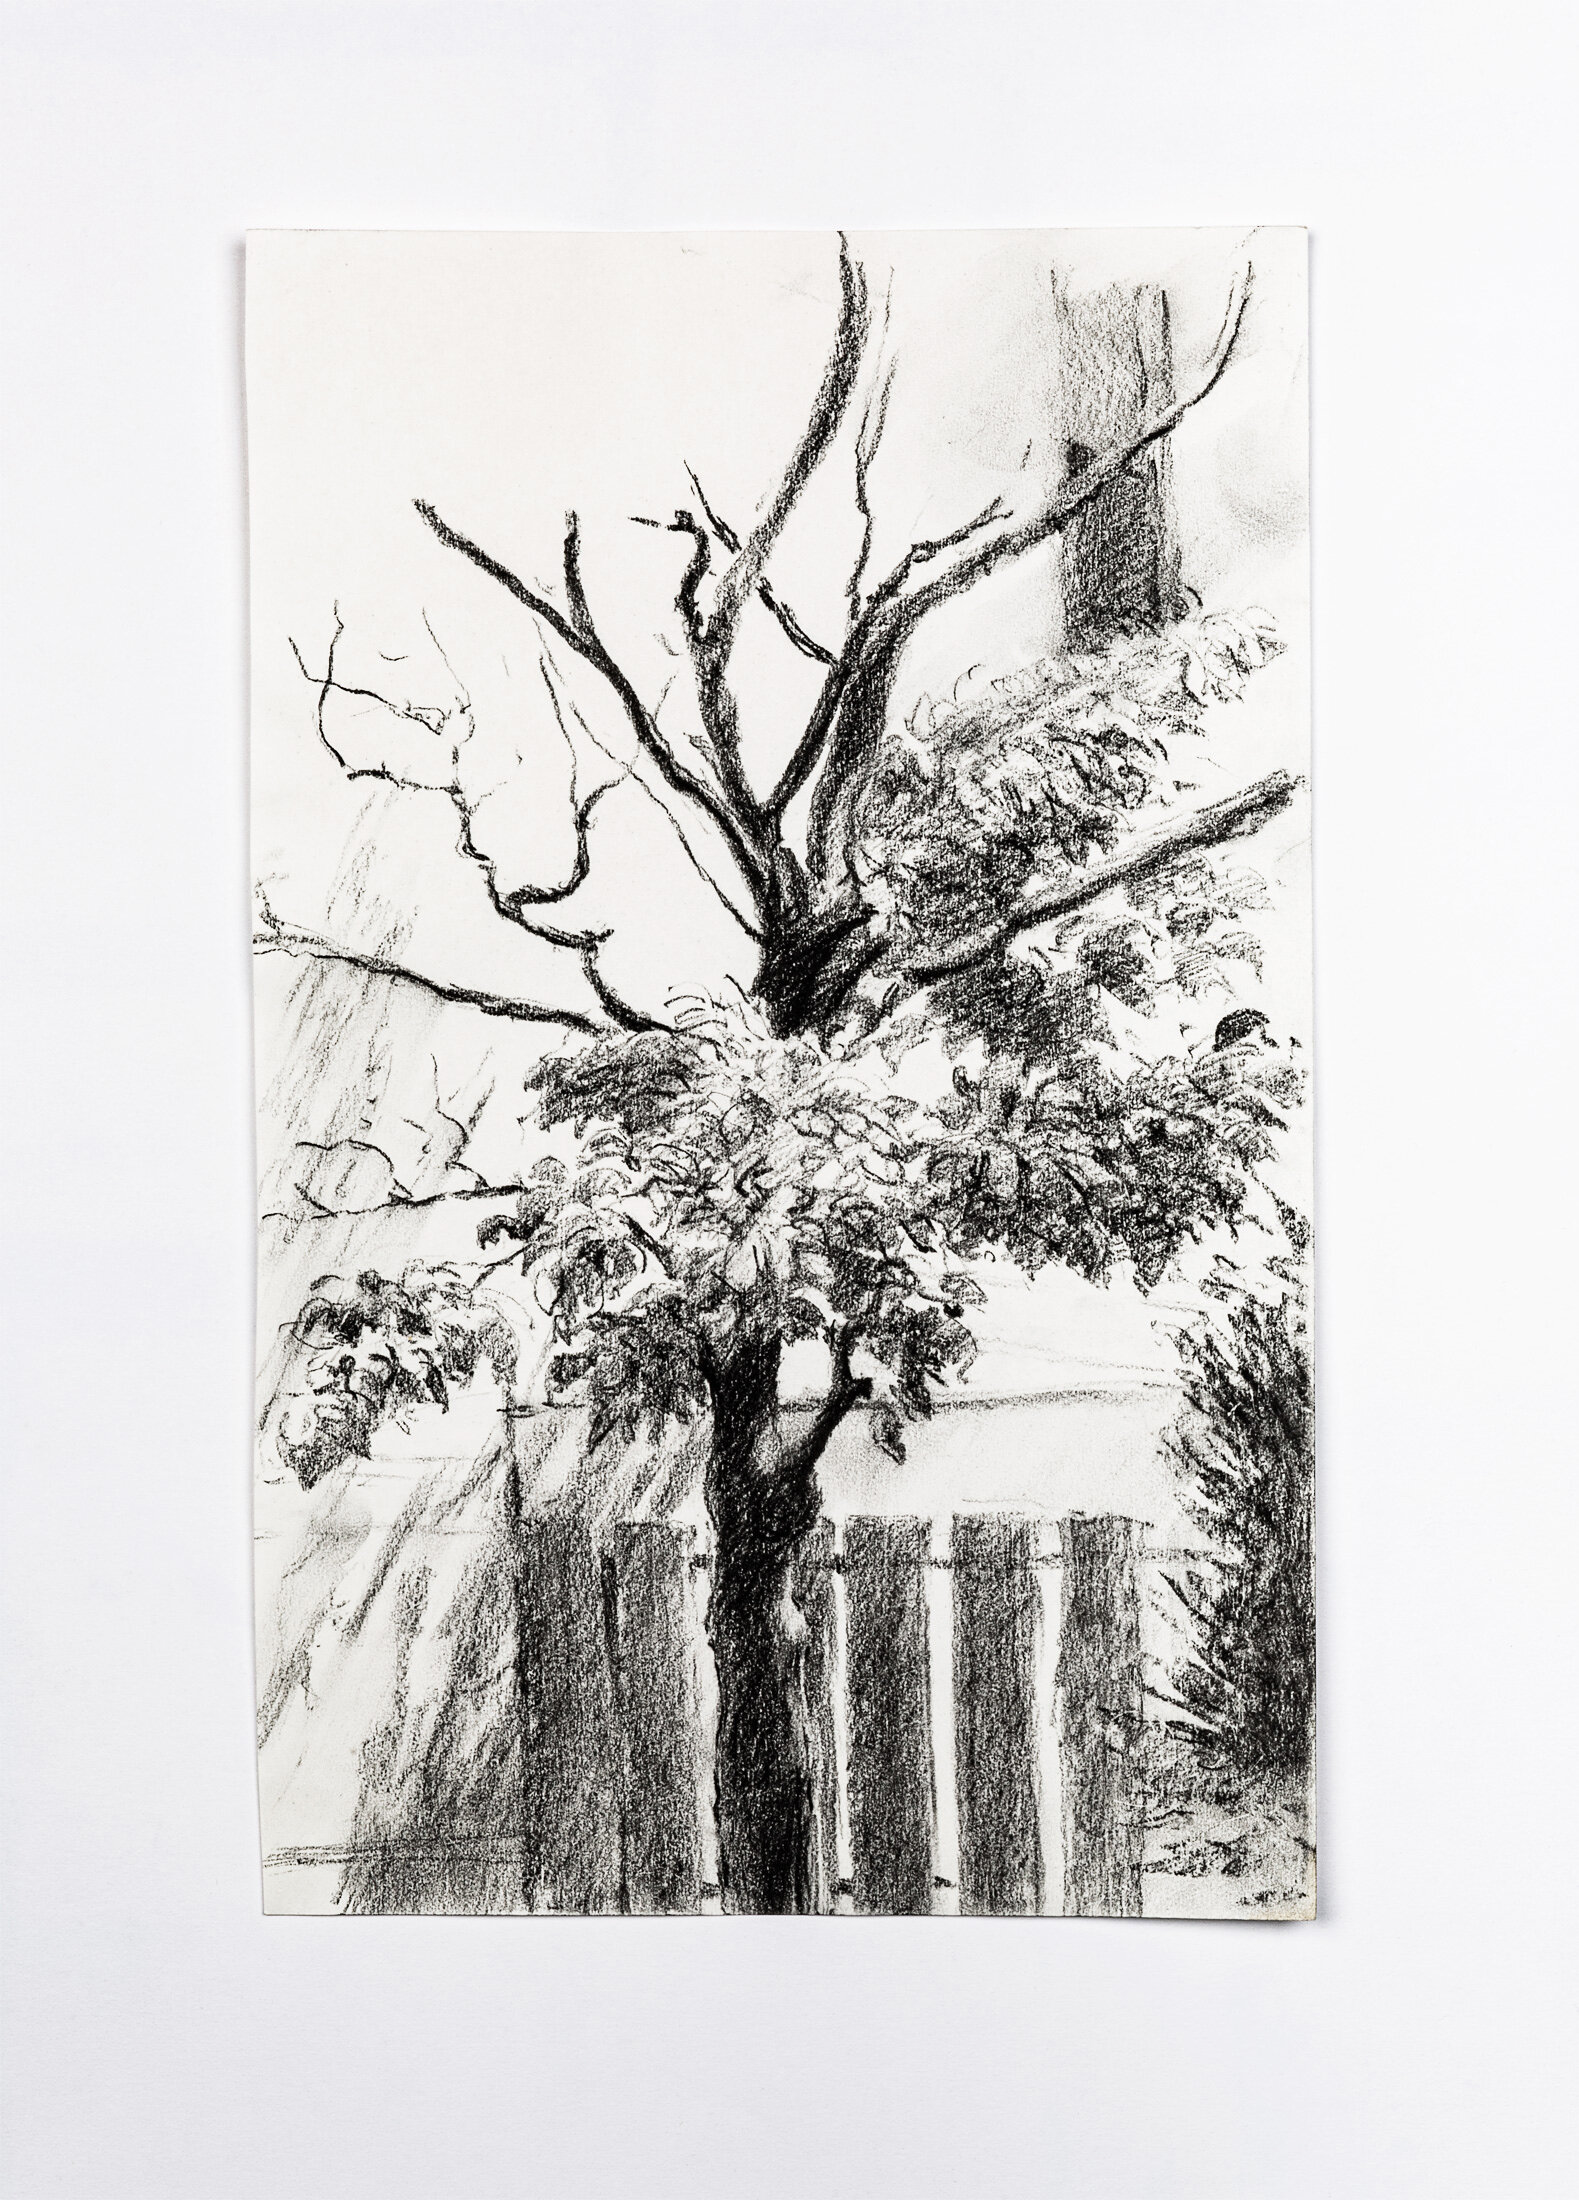 Tree near Fence, 2013 - charcoal pencil on paper